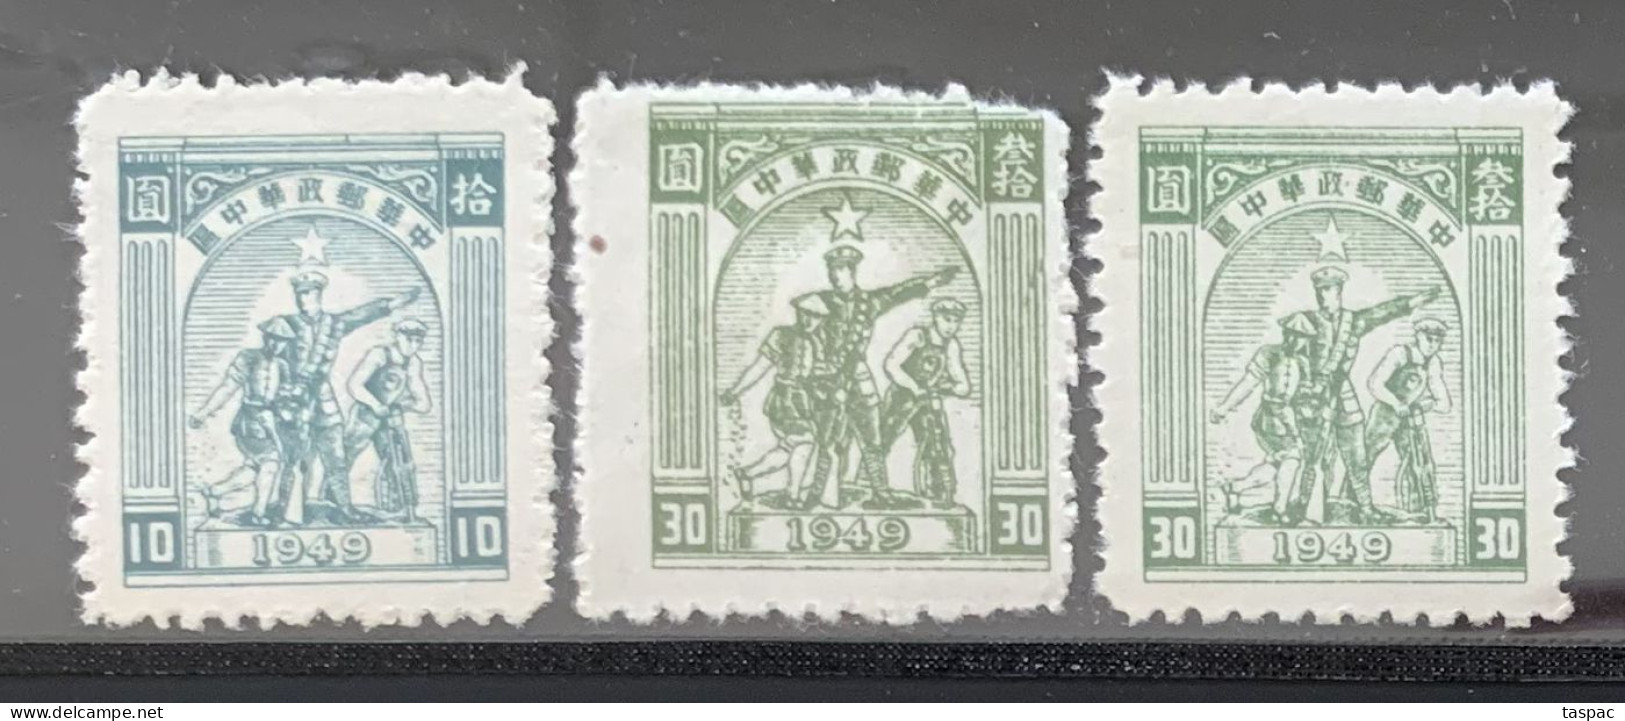 Central China 1949 Mi# 87, 89 A, 89 B (*) Mint No Gum - Short Set - Farmer, Soldier And Worker - China Central 1948-49